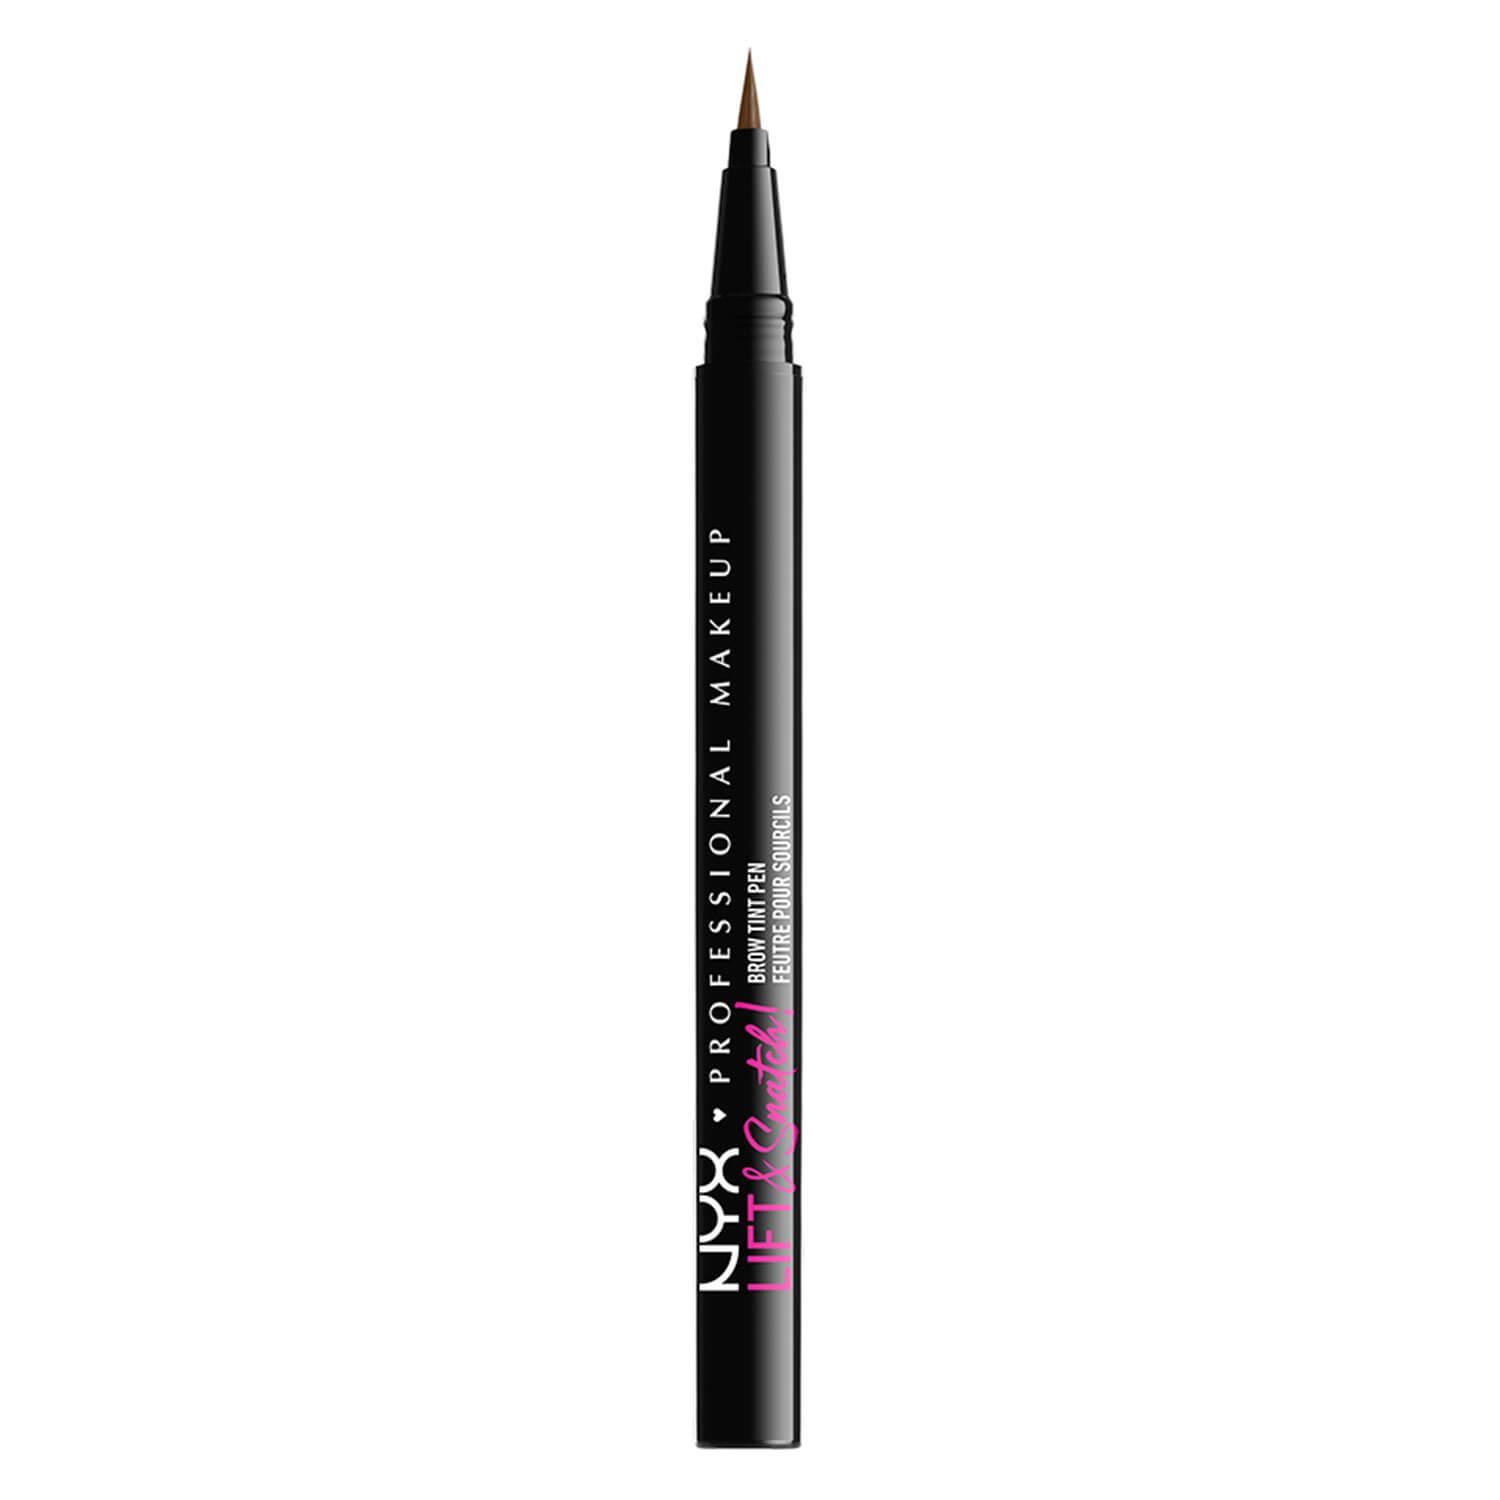 NYX Brows - Lift & Snatch! Brow Tint Pen Brunette 07